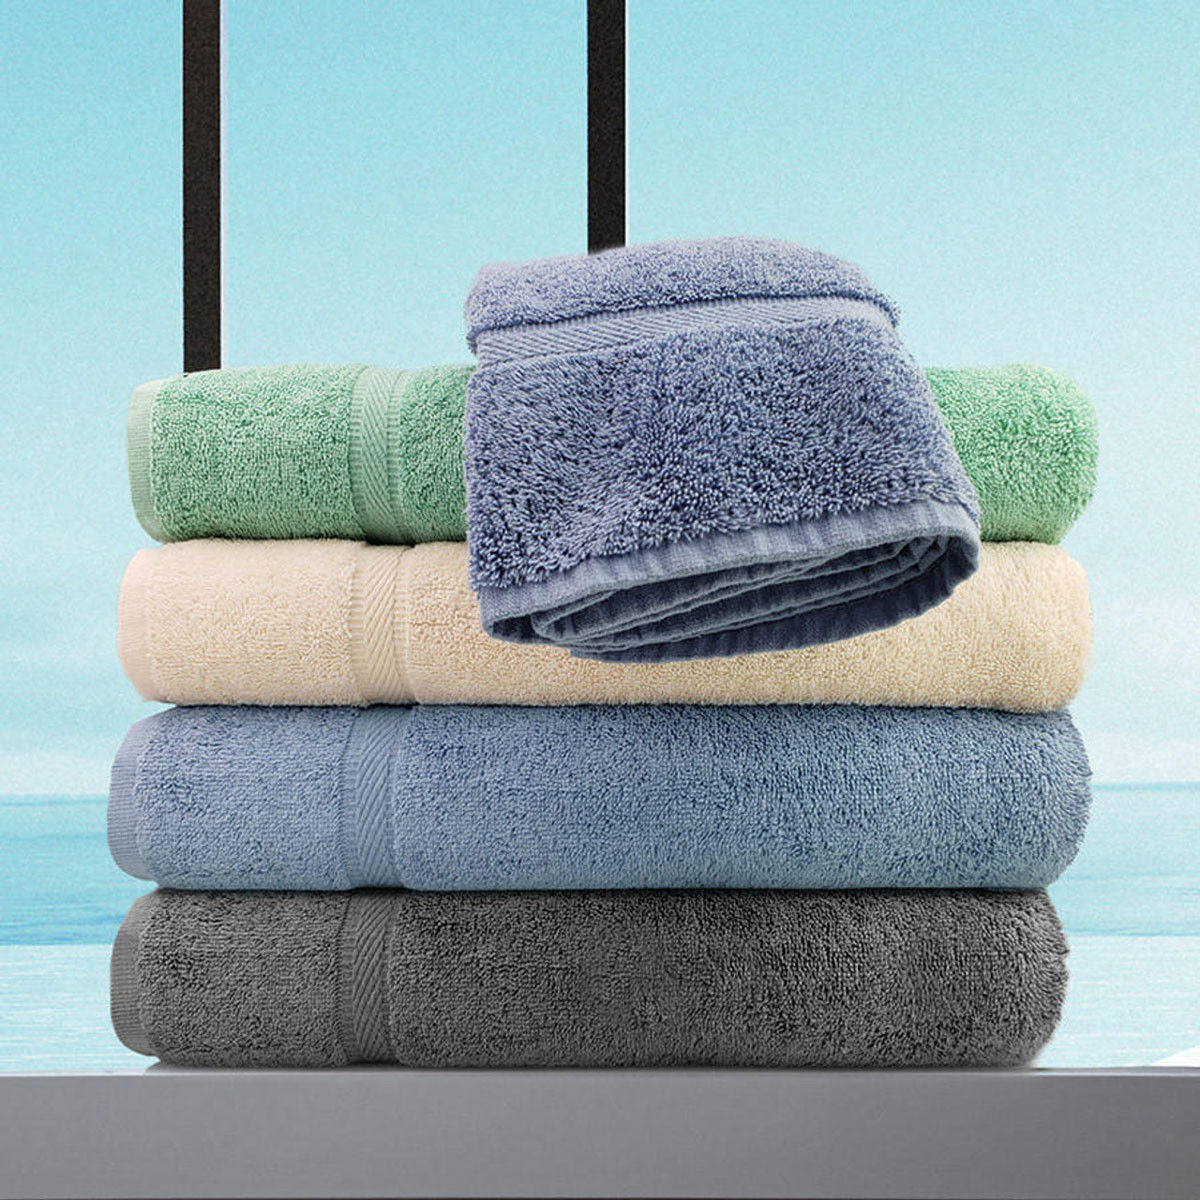 What is the dyeing process for the charcoal grey Oxford Imperiale Towels?